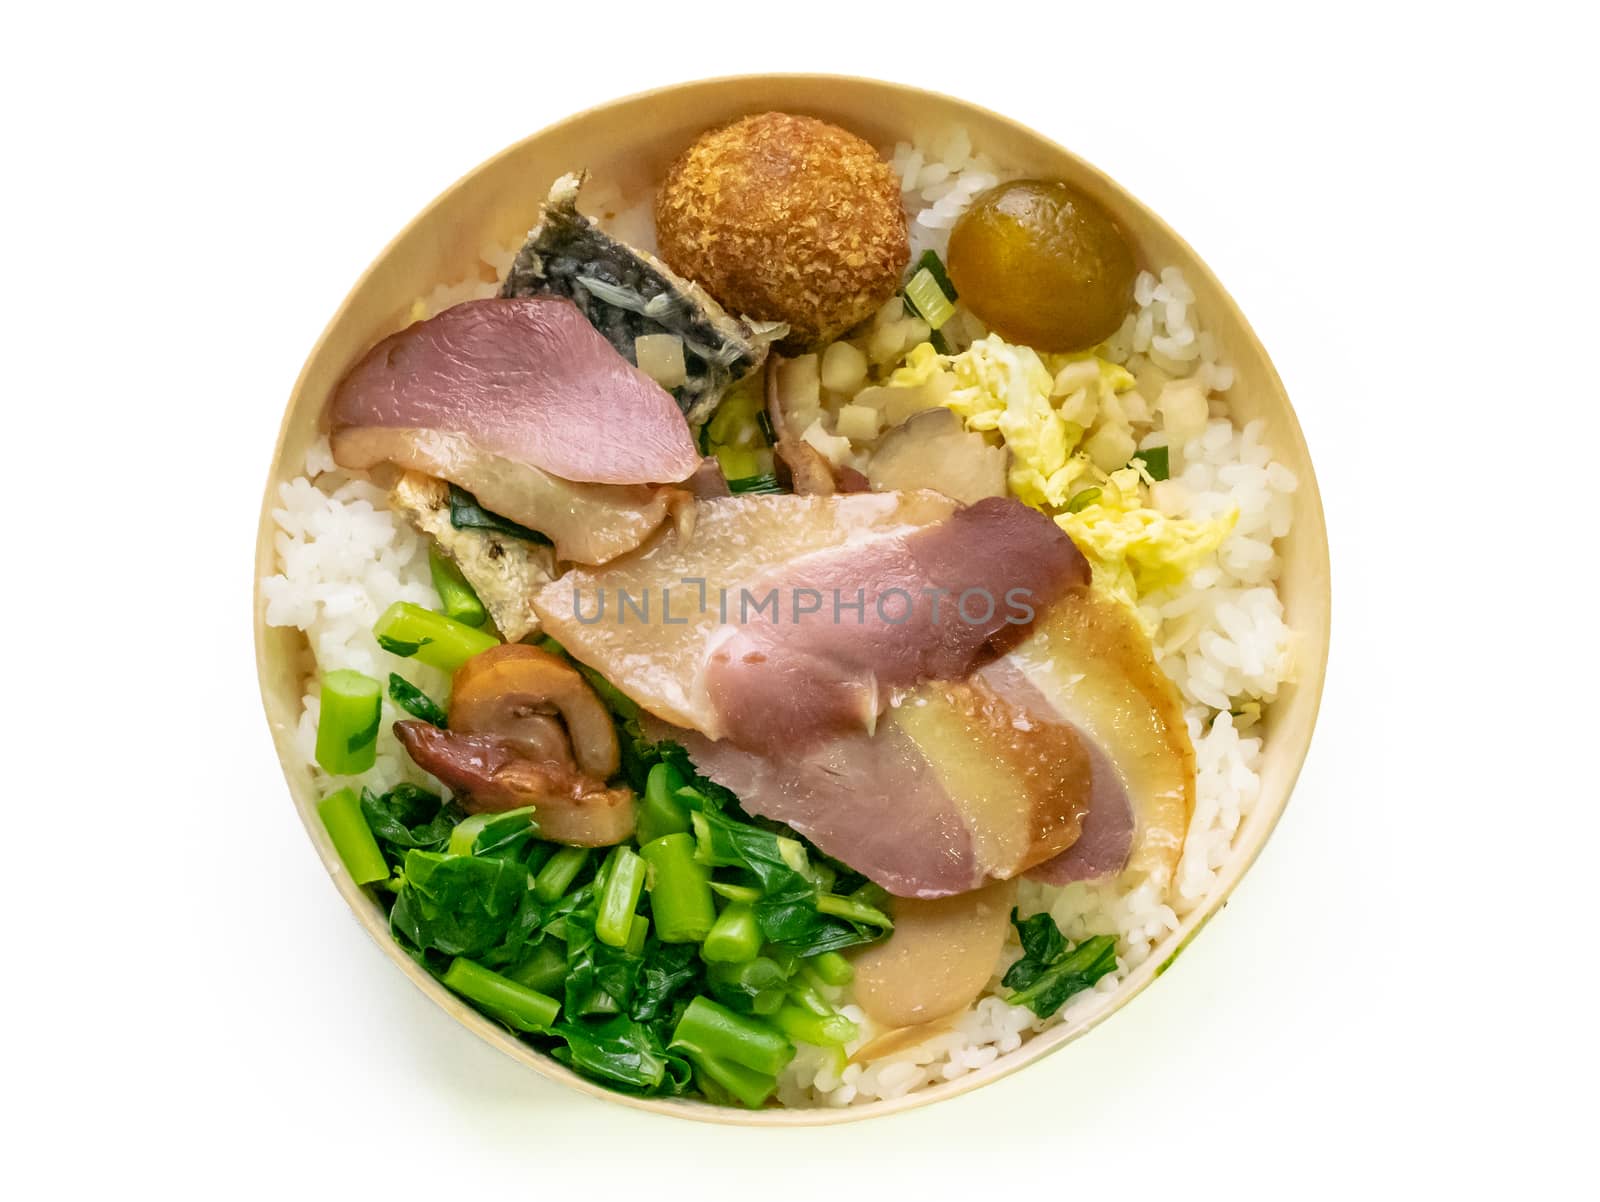 The close up of Taiwan railway lunch box meal food set isolated on white background.